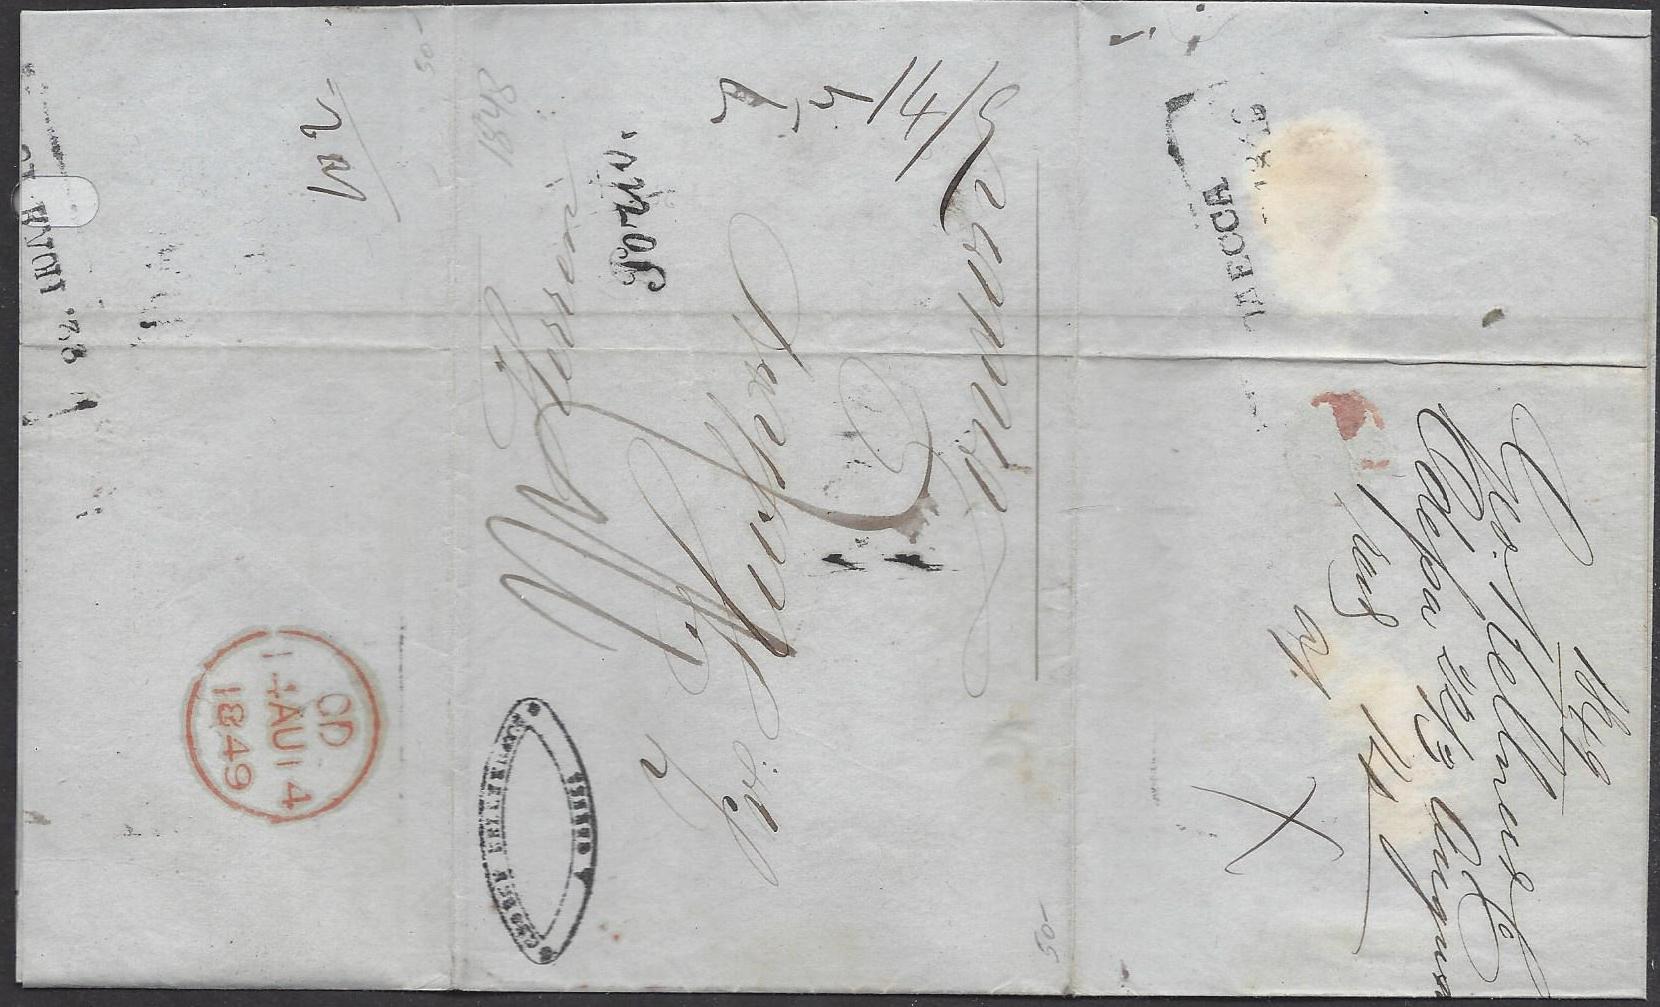 Russia Postal History - Stampless Covers Odessa Scott 2501848 